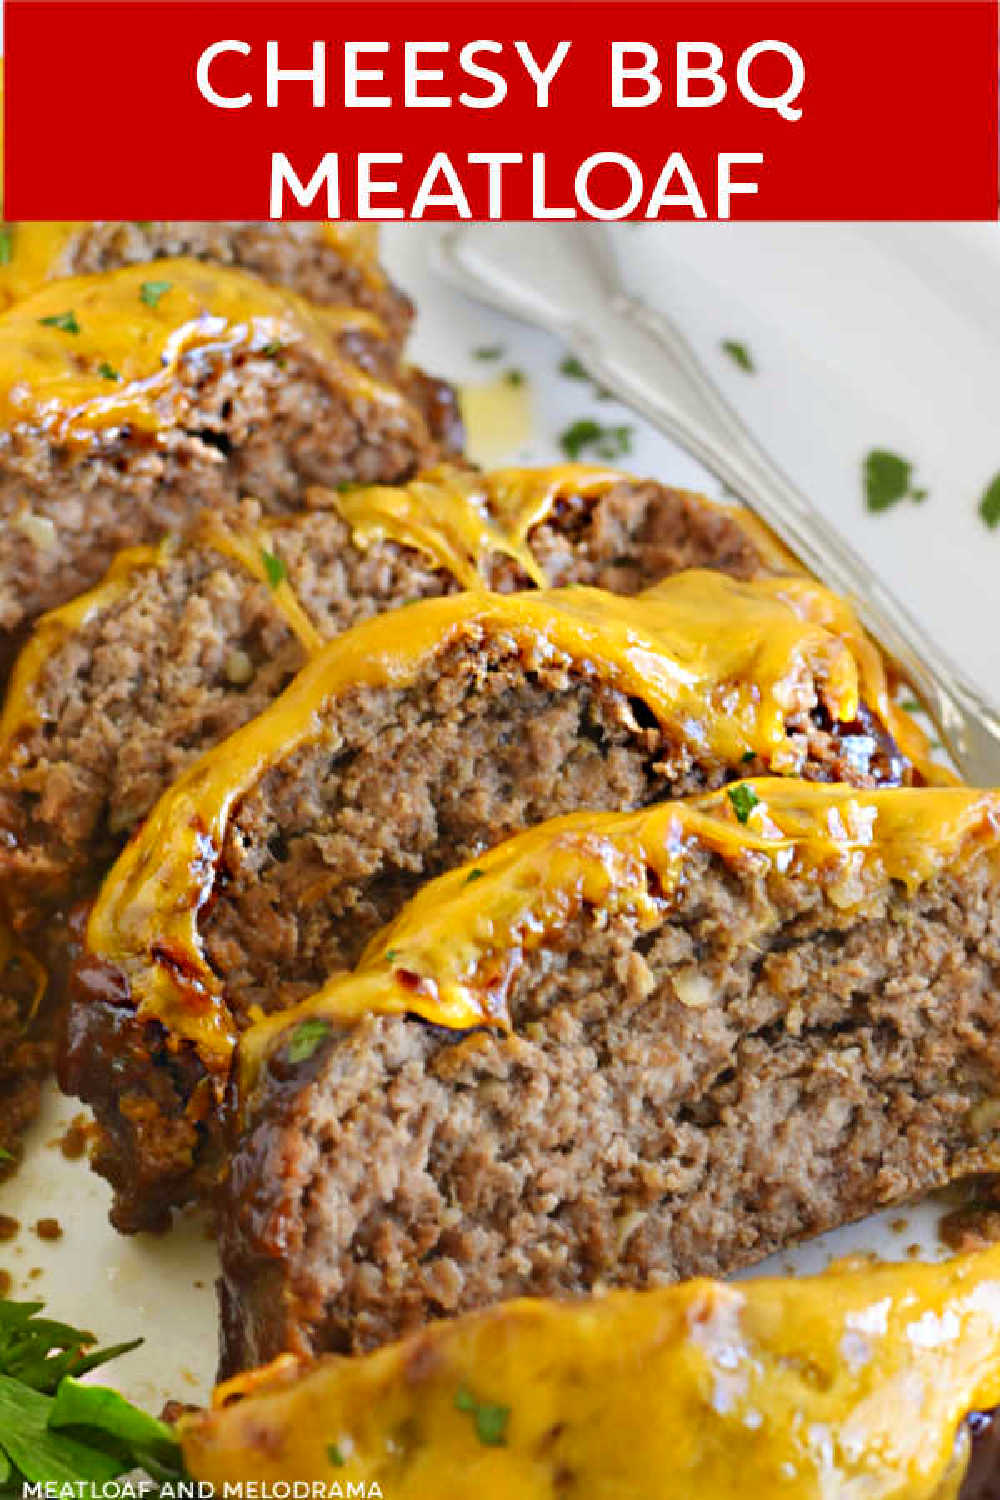 Cheesy BBQ Meatloaf Recipe has barbecue sauce, Parmesan cheese and cheddar cheese for a flavorful meatloaf the whole family loves. This easy recipe is a family favorite that is perfect for an easy weeknight meal! via @meamel